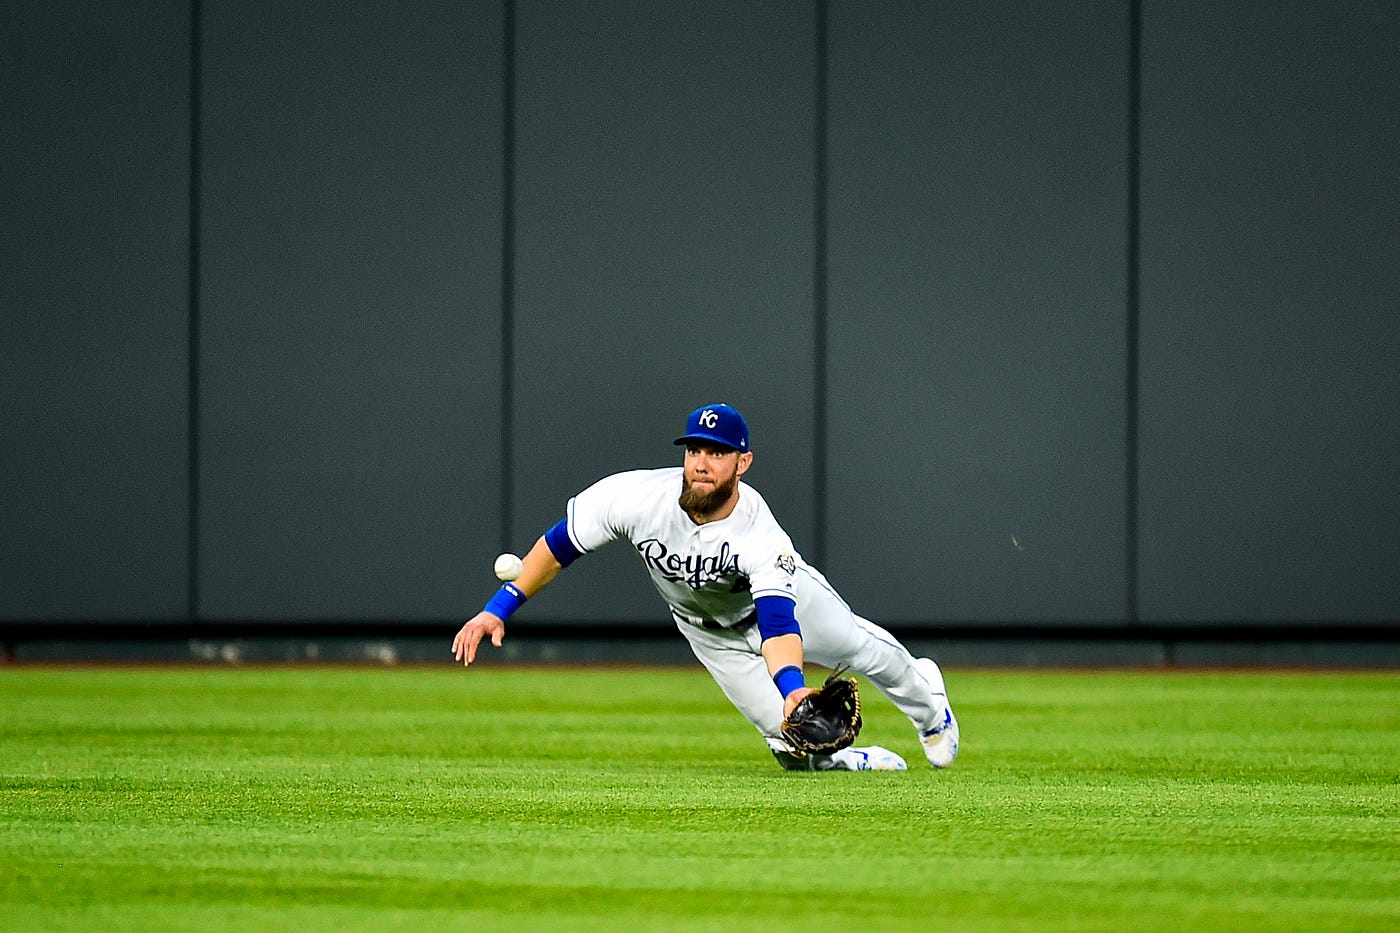 Perez, Gordon Named Finalists for Rawlings Gold Glove Awards, by Nick  Kappel